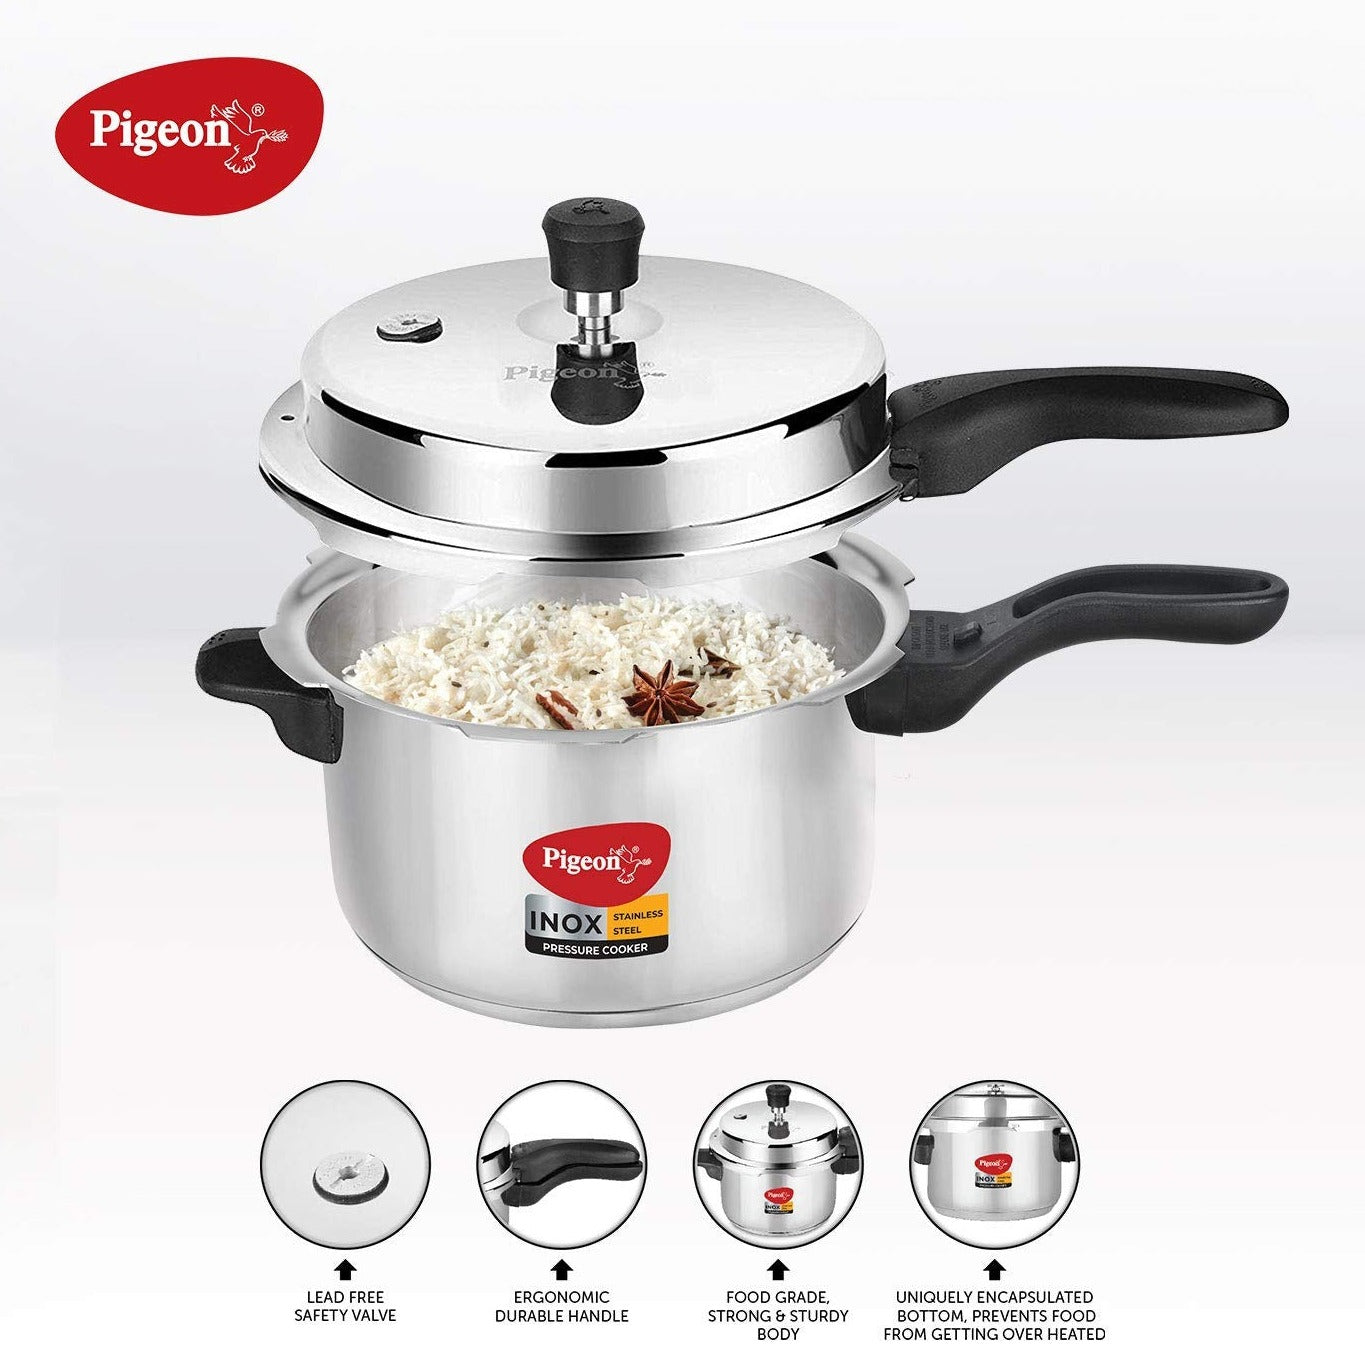 Pigeon Inox Stainless Steel Induction Base Outer Lid Pressure Cooker, 3 Litres